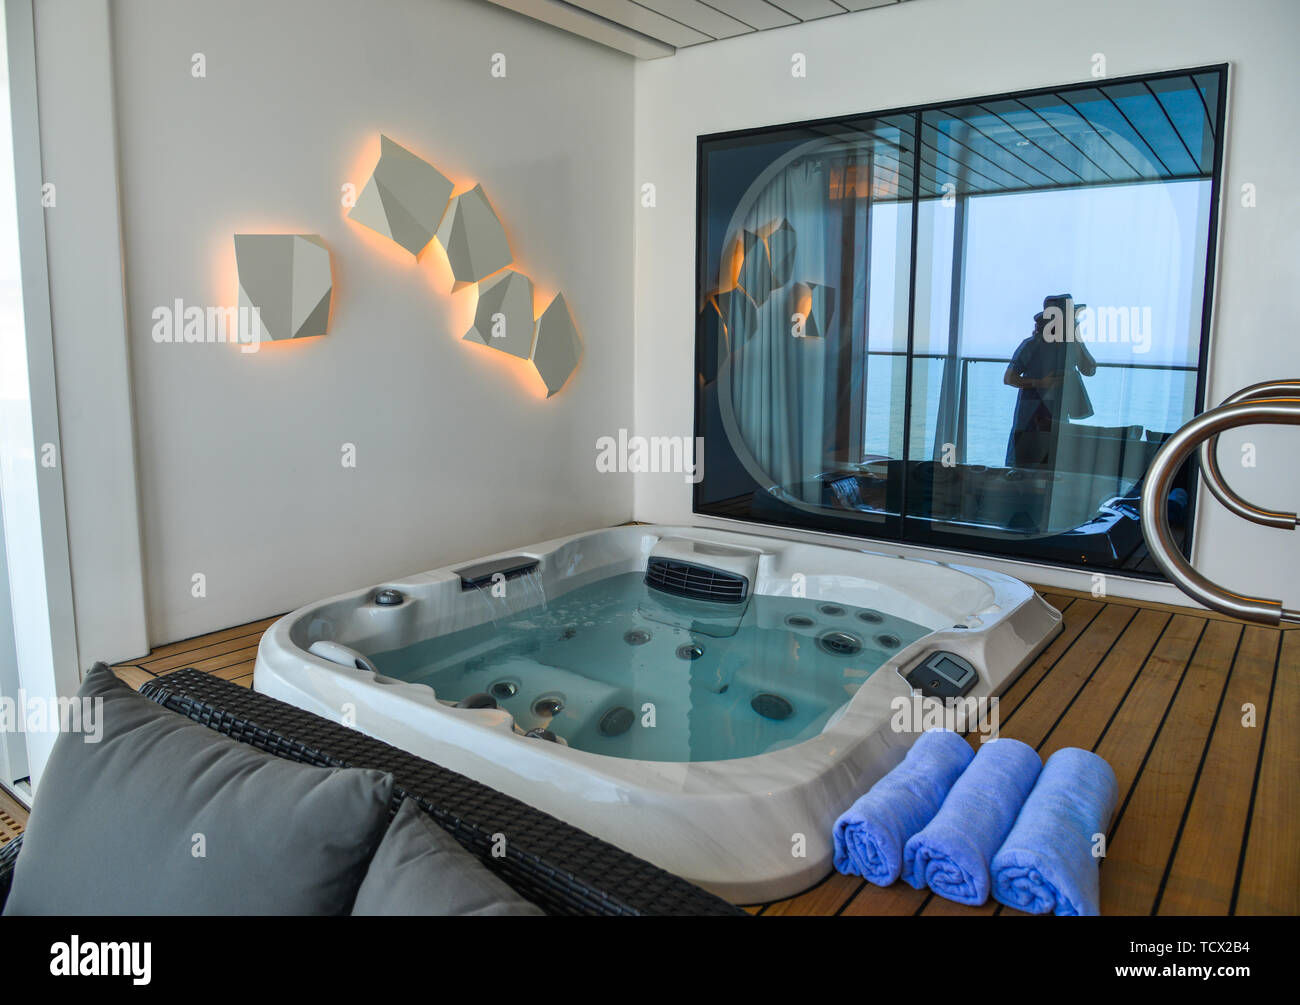 Shanghai, China - Jun 4, 2019. High Class Luxury Restaurant Interior Of  Spectrum Of The Seas Cruise Ship By Royal Caribbean In Sunny Day. Stock  Photo, Picture and Royalty Free Image. Image 125249509.